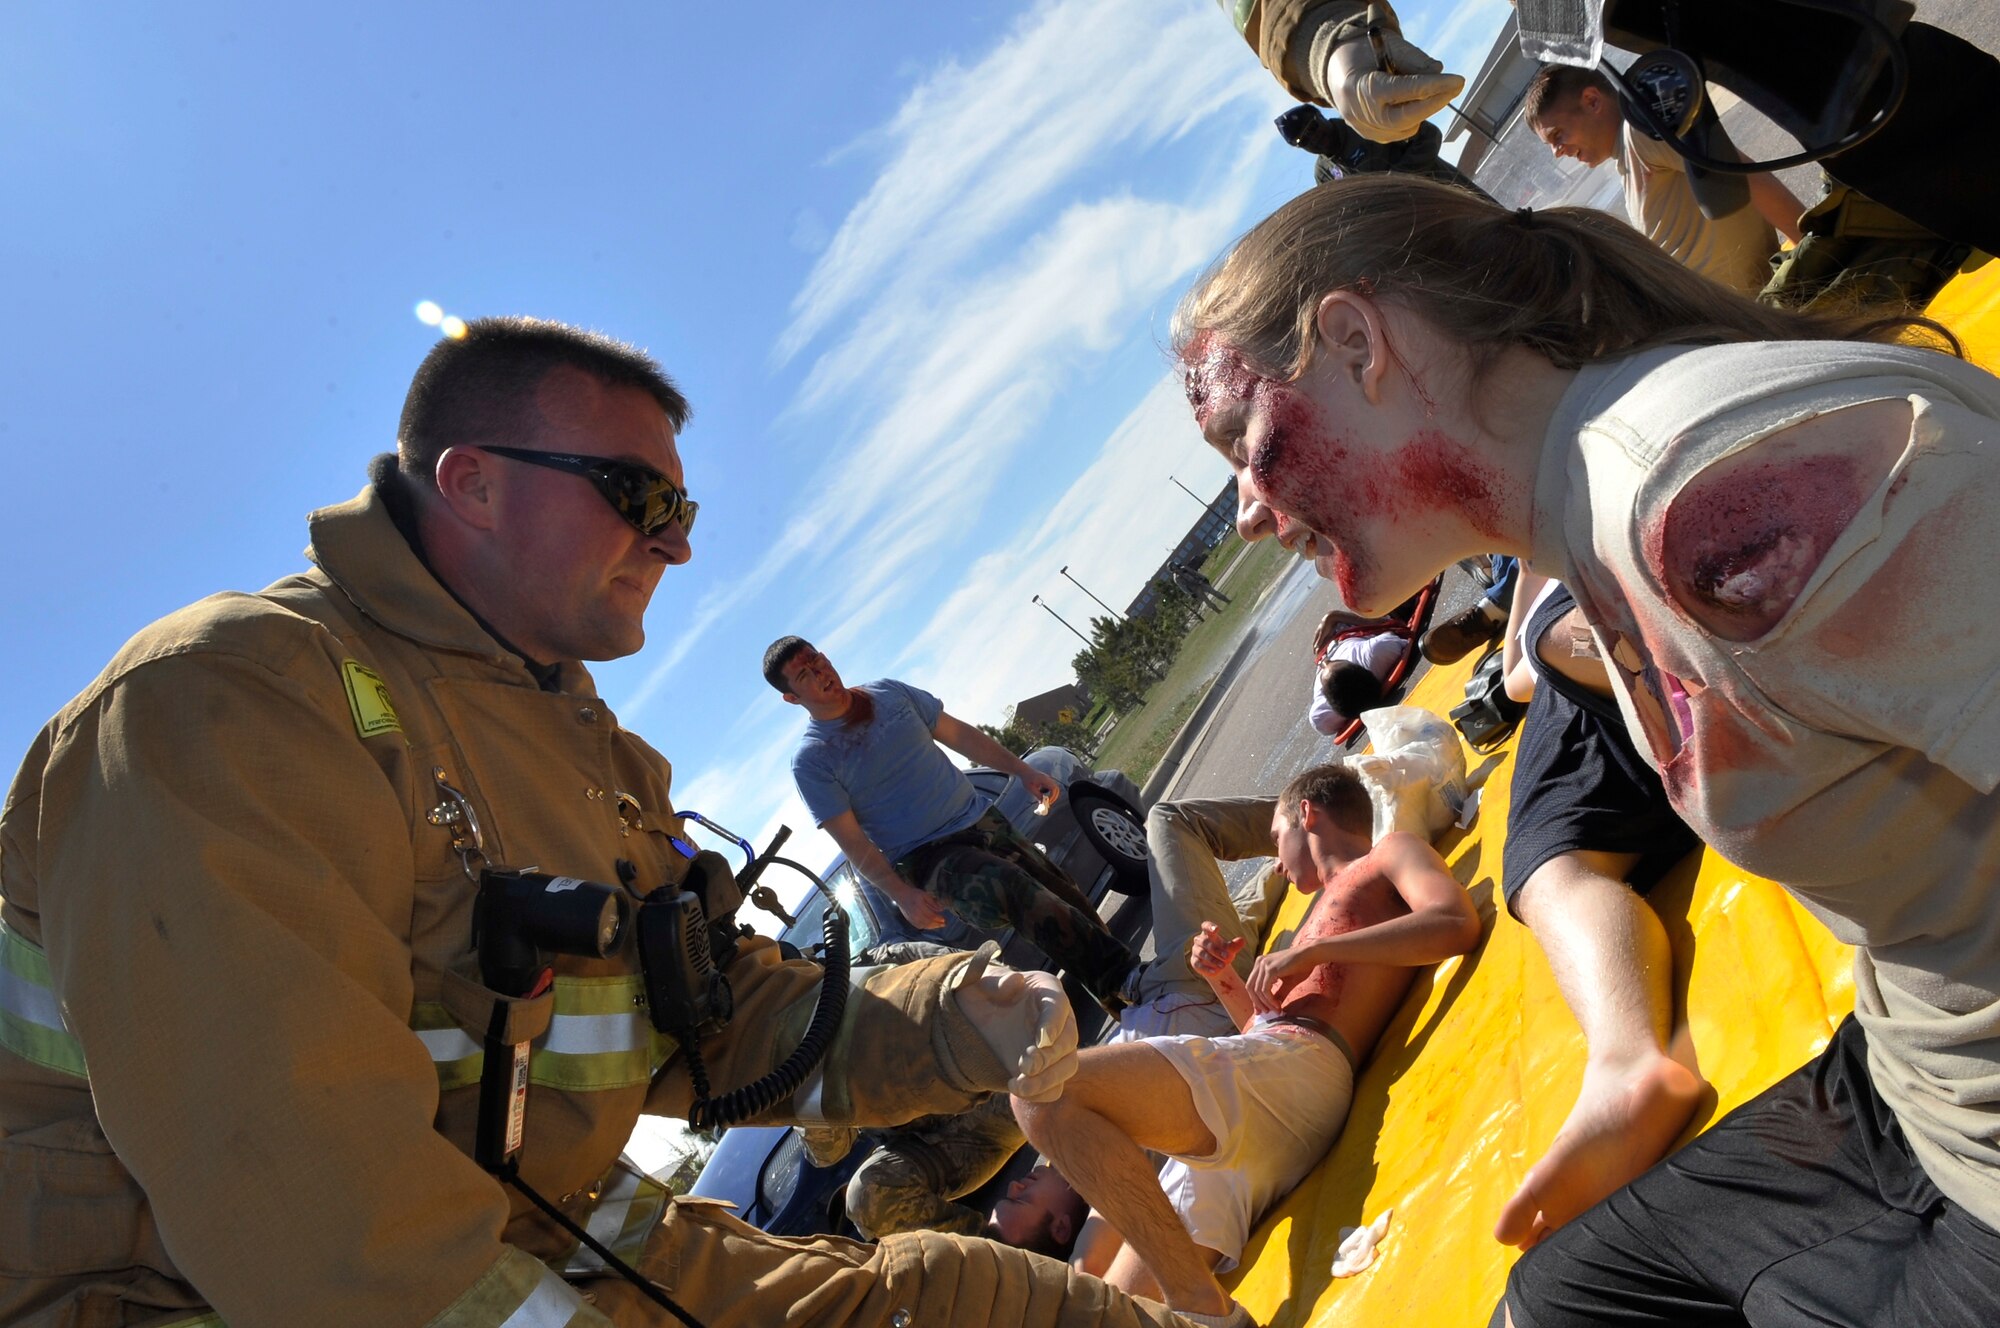 BUCKLEY AIR FORCE BASE, Colo. -- Airman 1st Class Brittany Carlisle, 460th Comptroller Squadron, receives treatment from an emergency responder. Emergency response teams reacted to multiple casualty simulations across the base May 21. (U.S. Air Force photo by Airman 1st Class Paul Labbe)